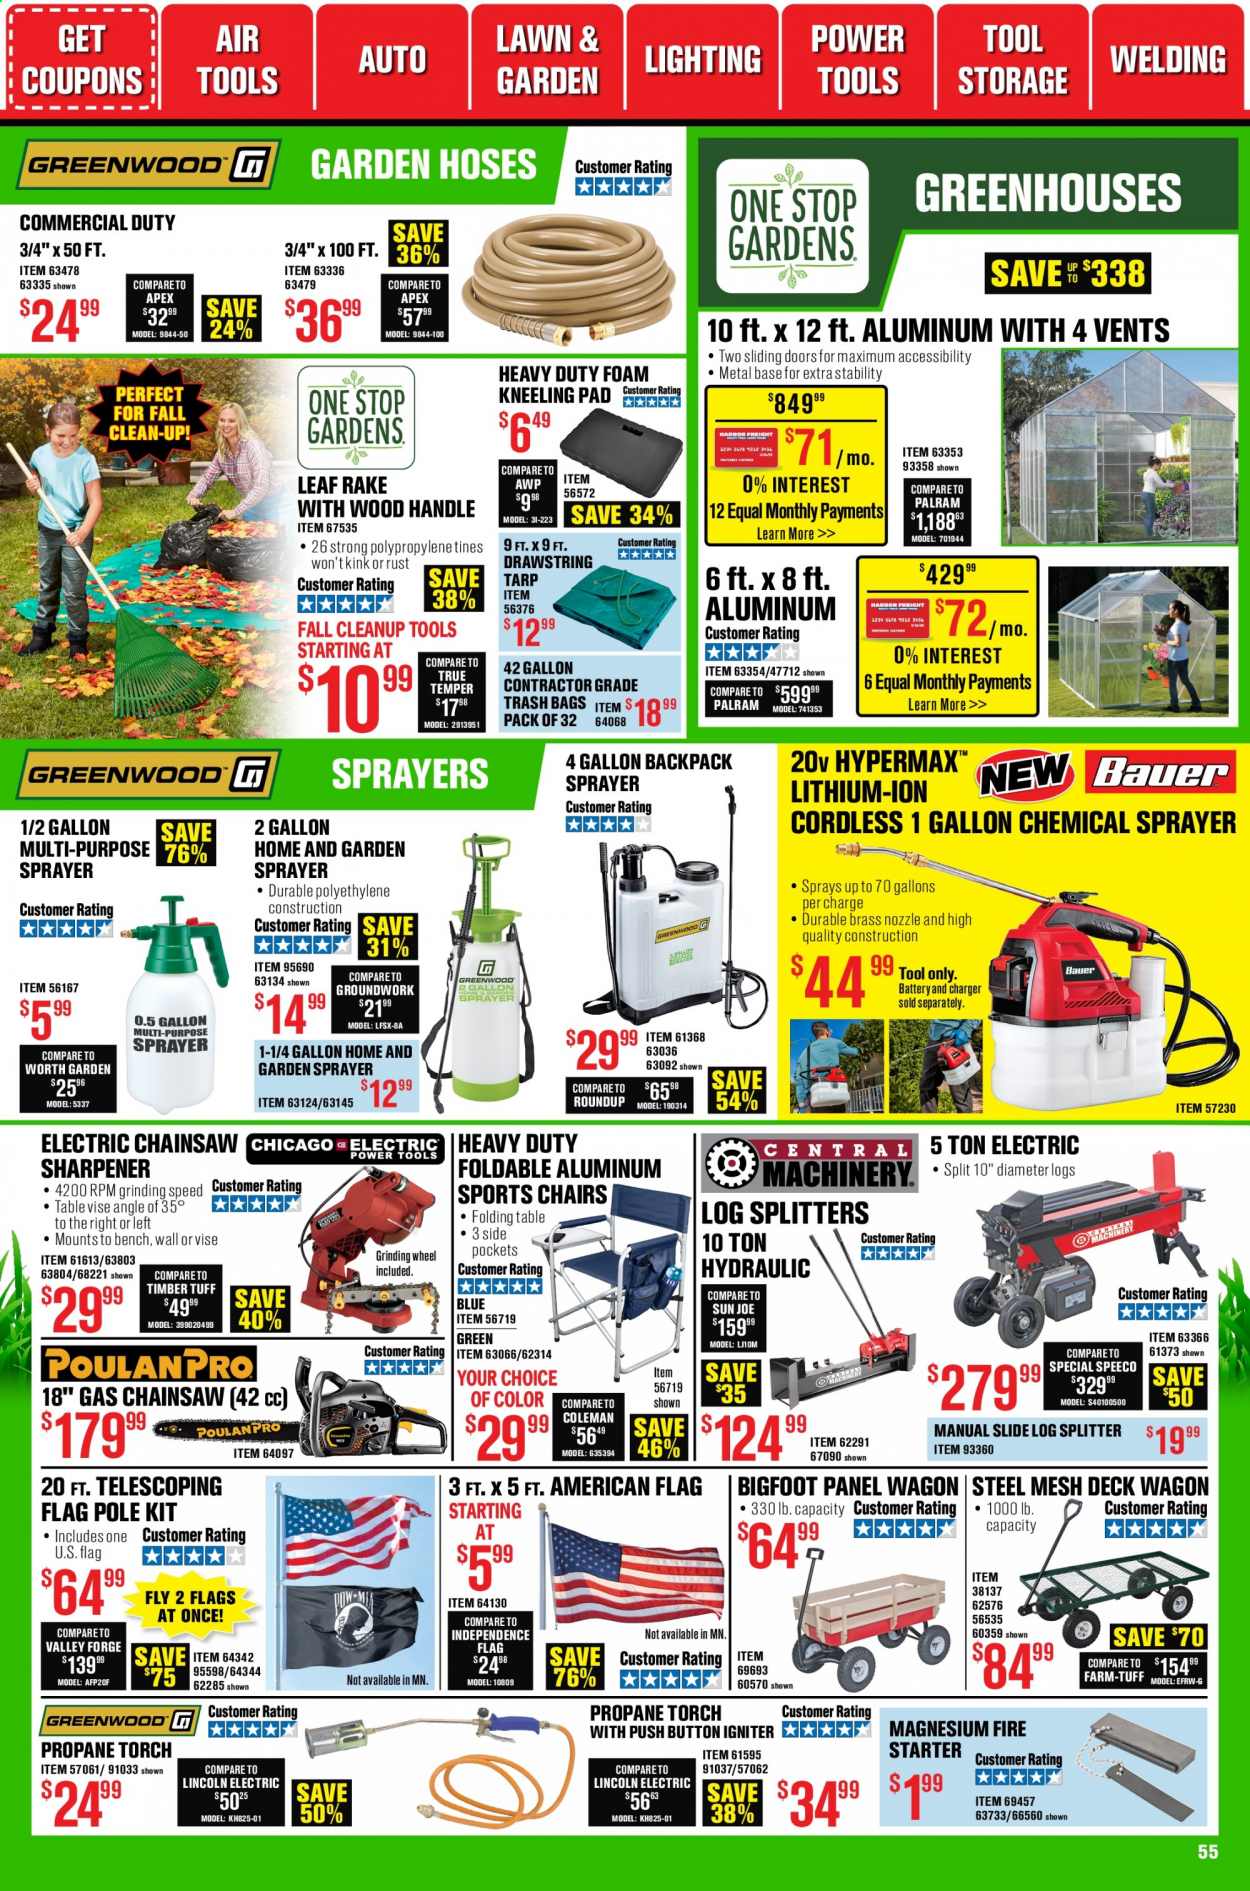 thumbnail - Harbor Freight Flyer - 01/01/2021 - 01/28/2021 - Sales products - backpack, bag, torch, door, power tools, chain saw, grinding wheel, log splitter, steel mesh deck wagon, sprayer, garden hose, Roundup, starter. Page 55.